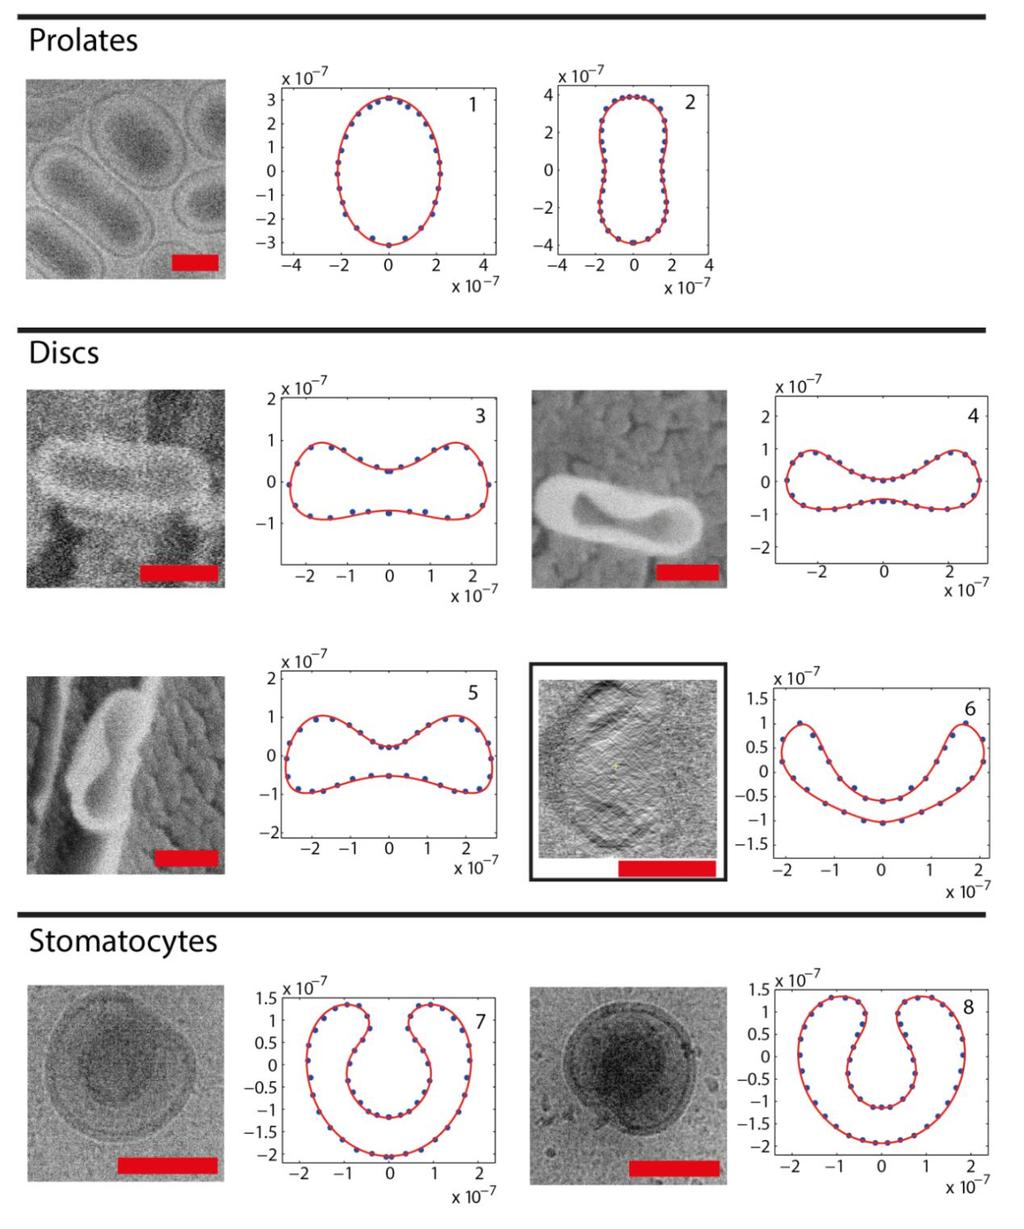 Supplementary Figure 9. Parameterization of different shapes from EM images. The cryo-tem image of the prolates was taken from sample 2 which was 4 days old.